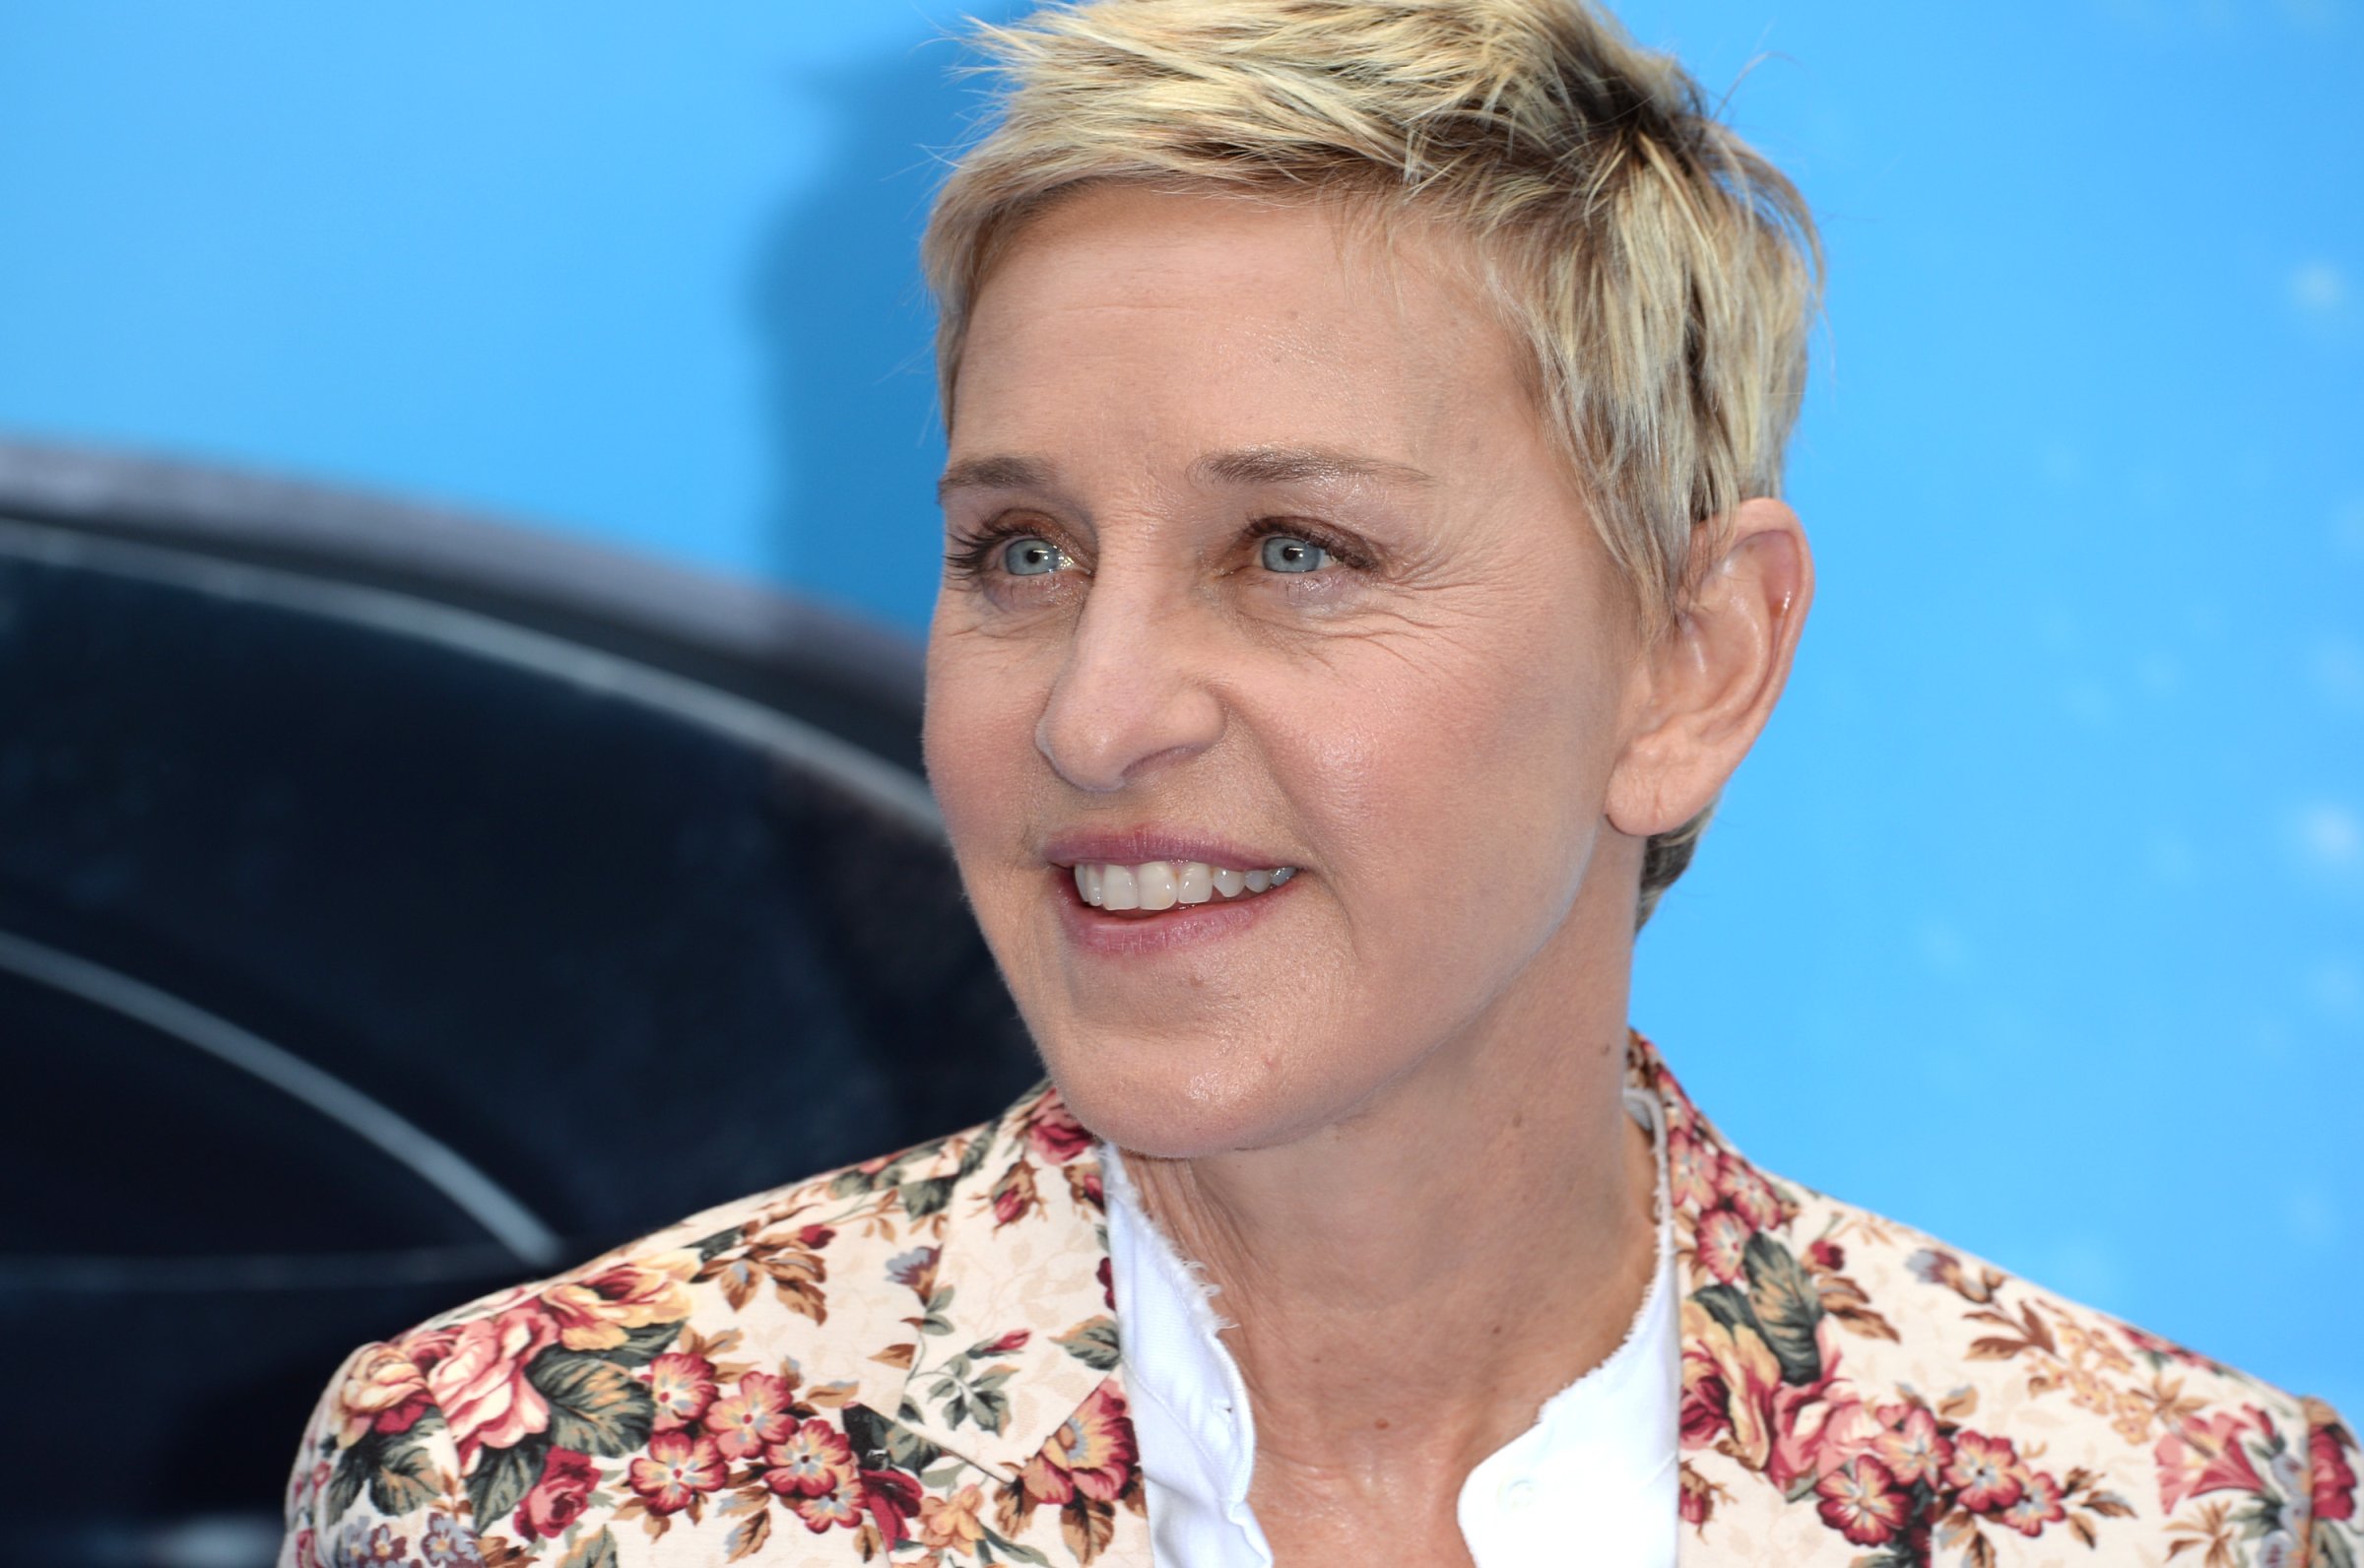 Ellen DeGeneres attends the UK Premiere of "Finding Dory" at Odeon Leicester Square in London on July 10, 2016.